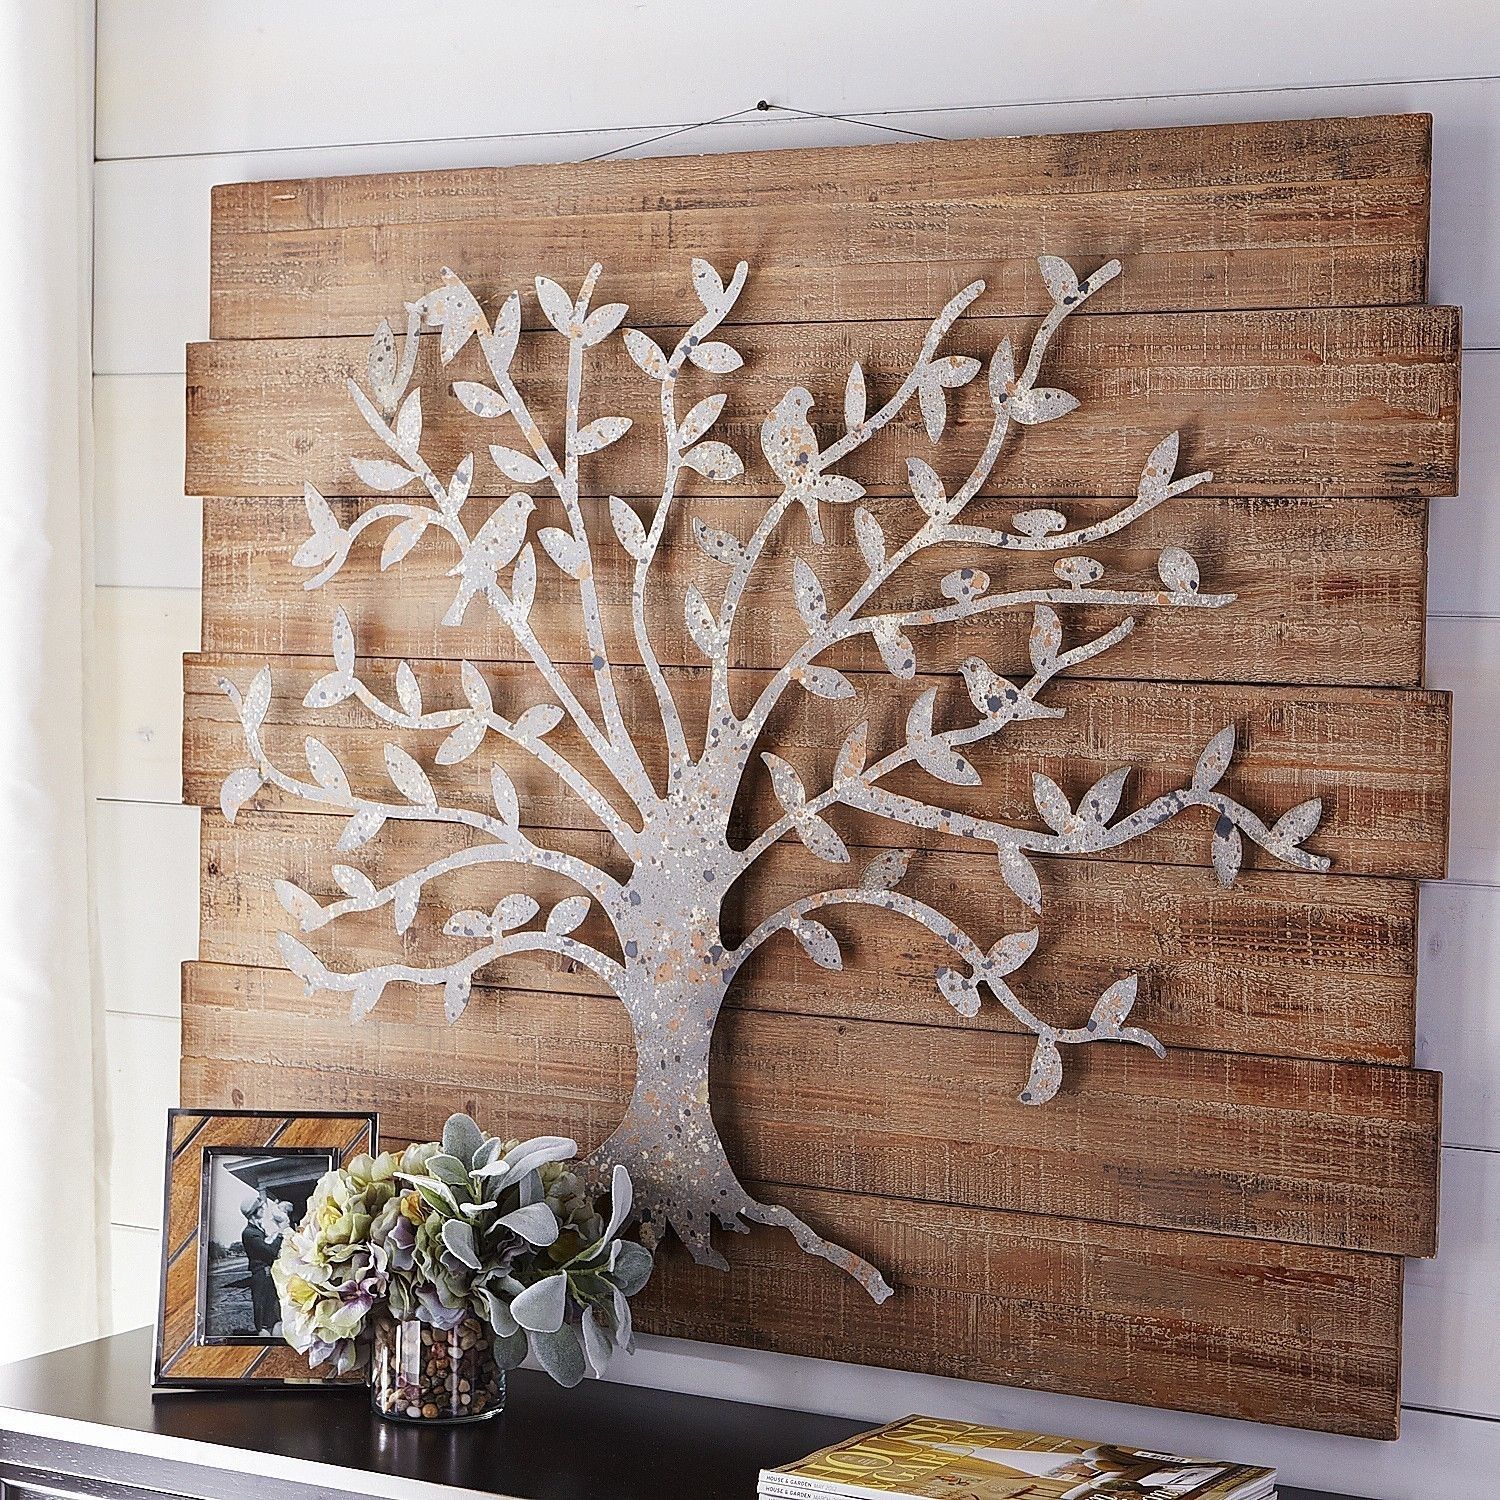 Timeless Tree Wall Decor | Pier 1 Imports … | Metal Work | Pinte… For Wall Art (View 5 of 20)